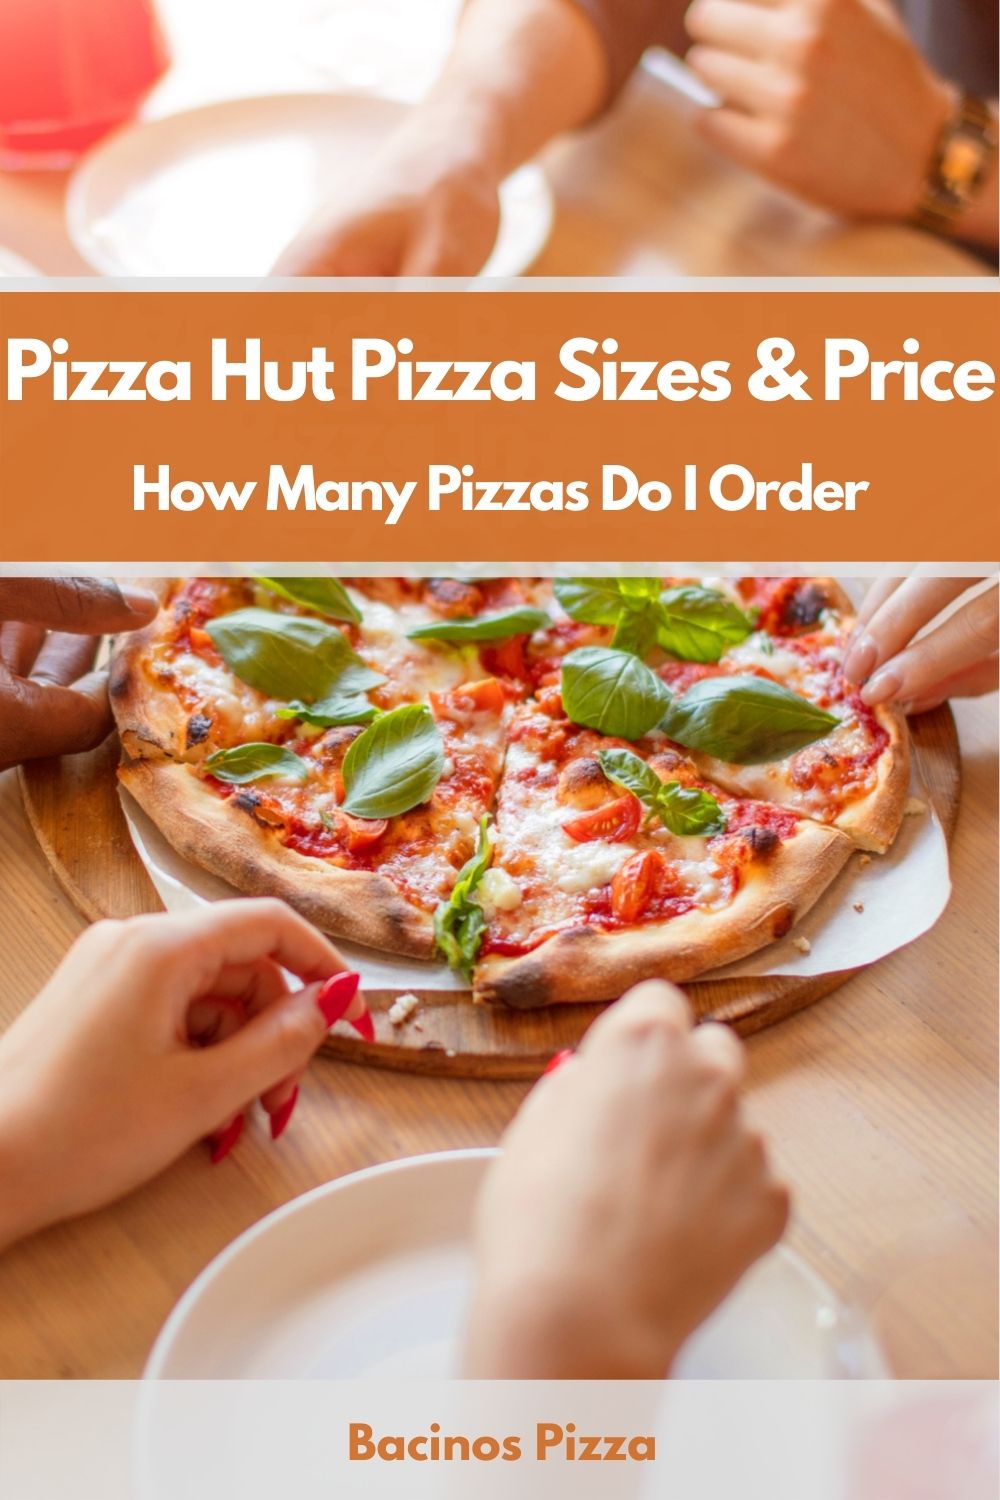 Pizza Hut Pizza Sizes & Price How Many Pizzas Do I Order pin 2